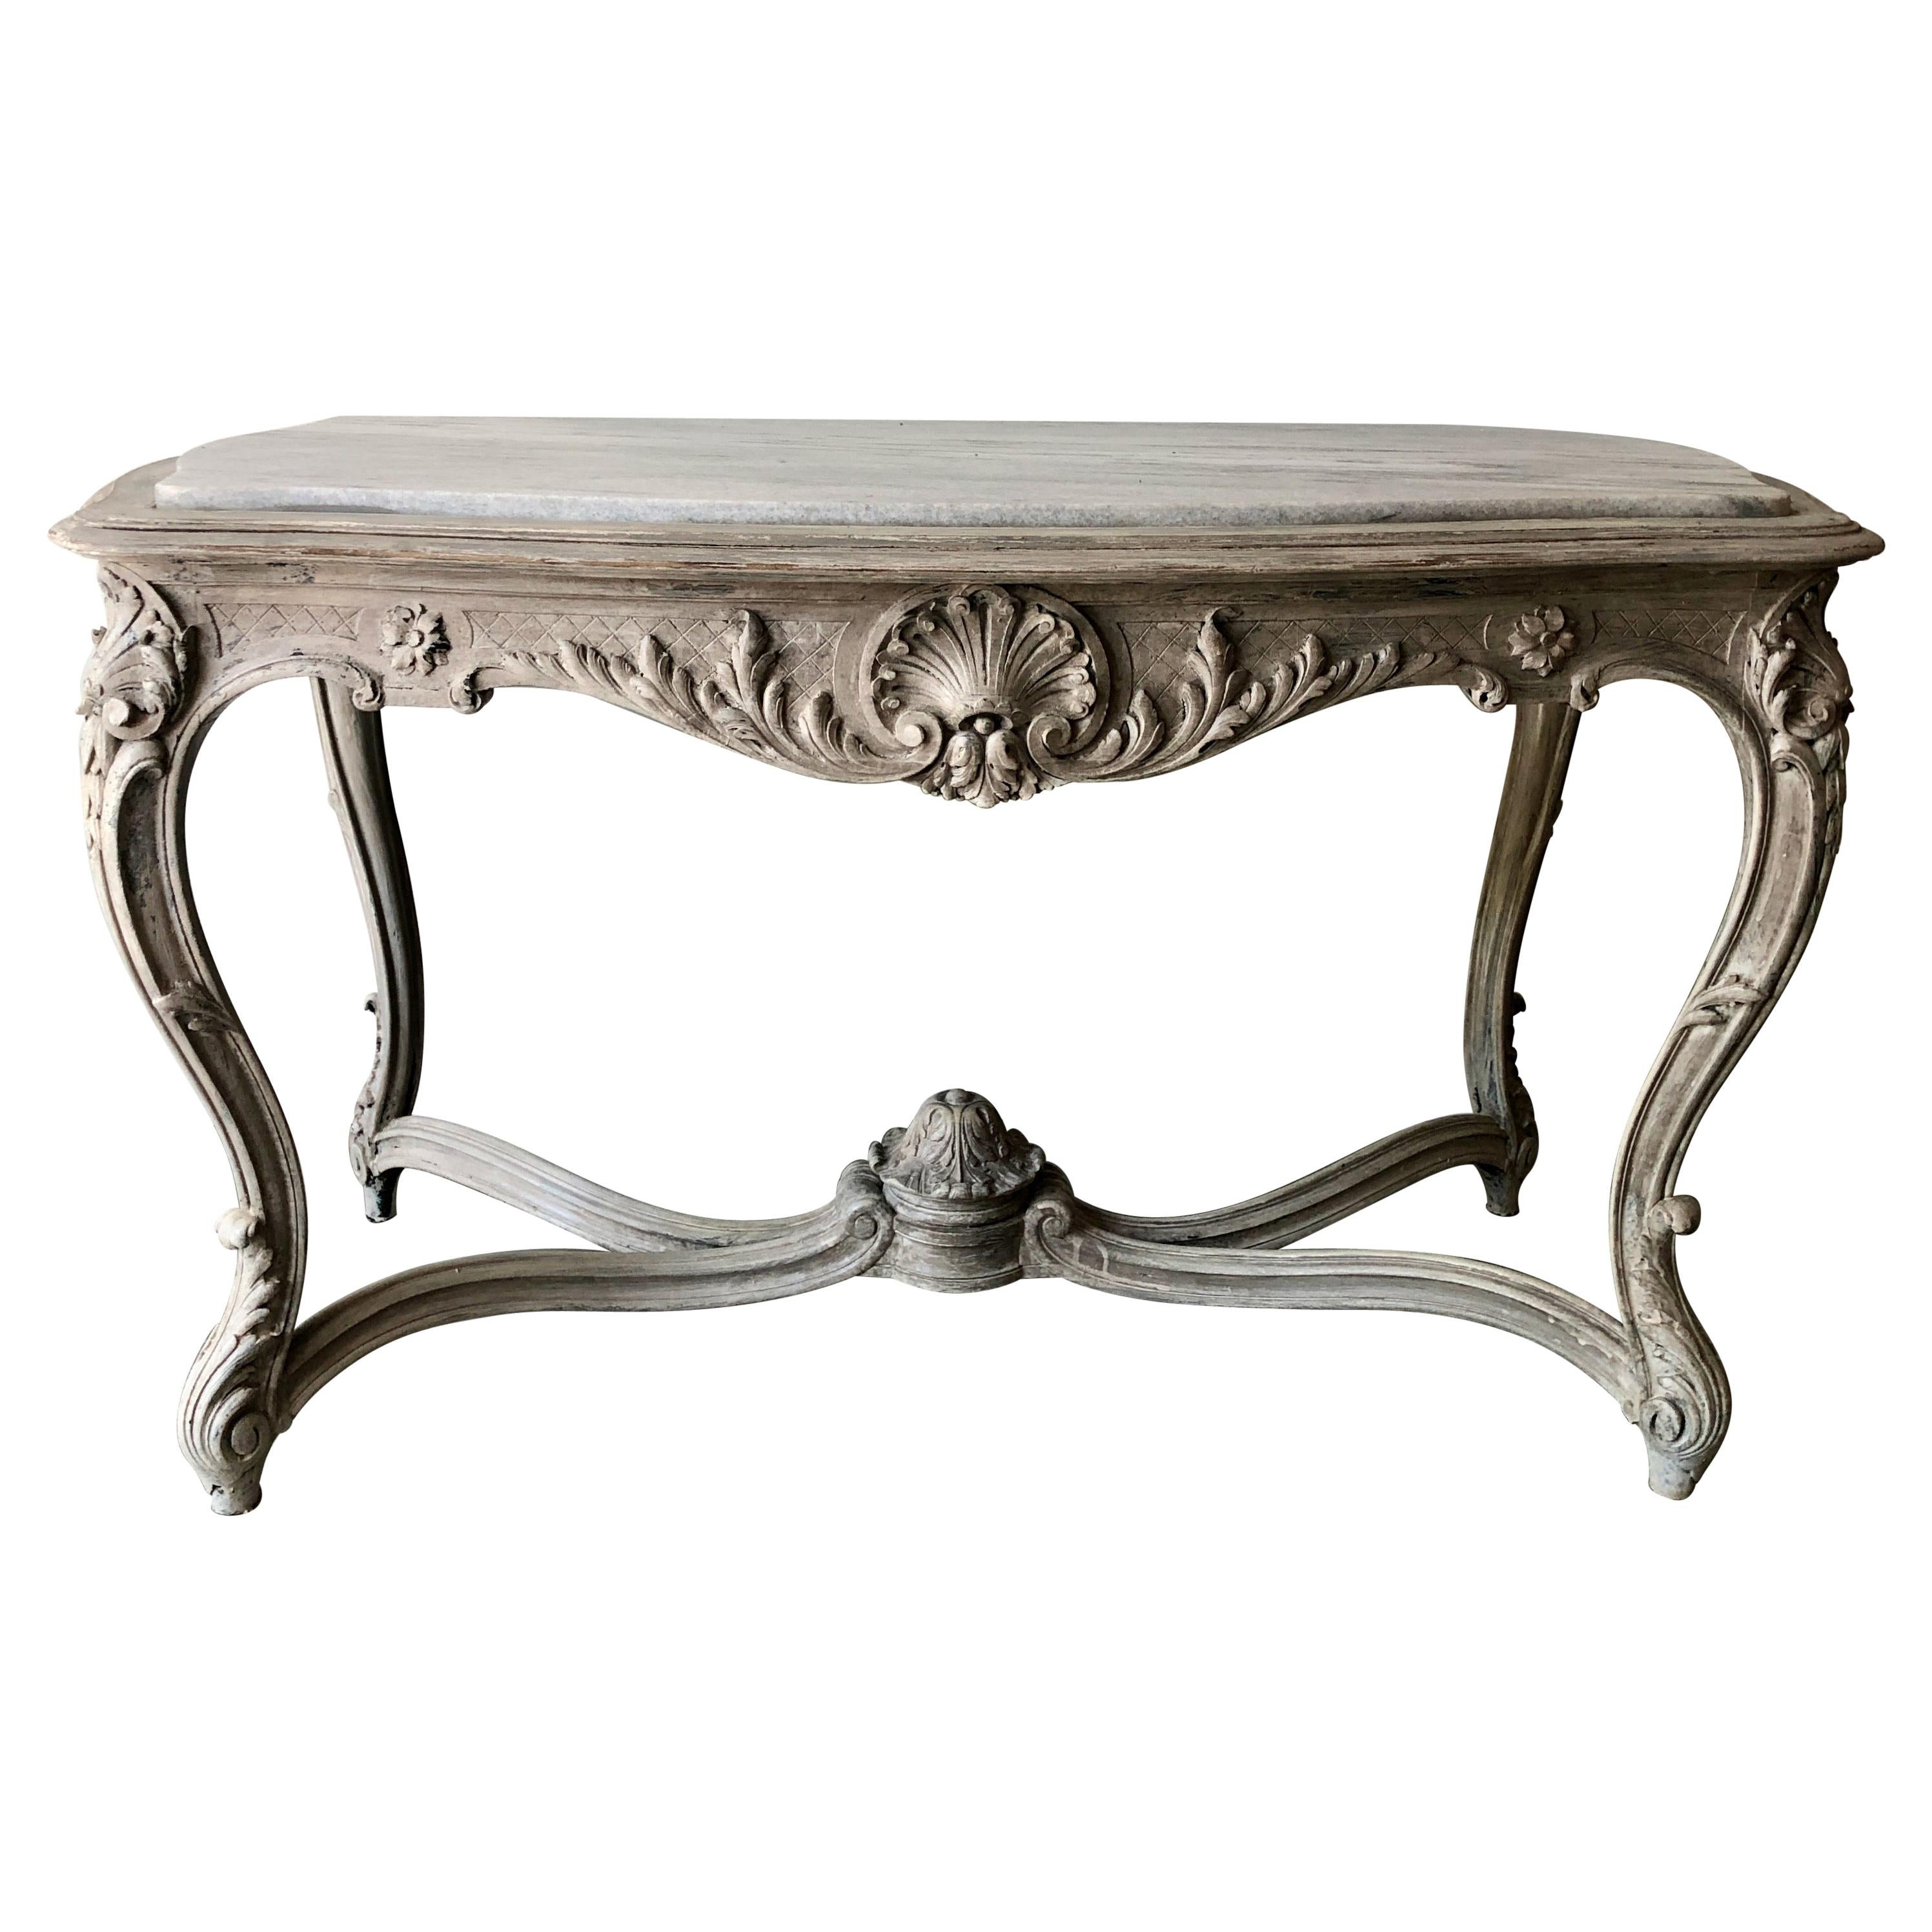 19th century French Serpentine Shaped Center Table